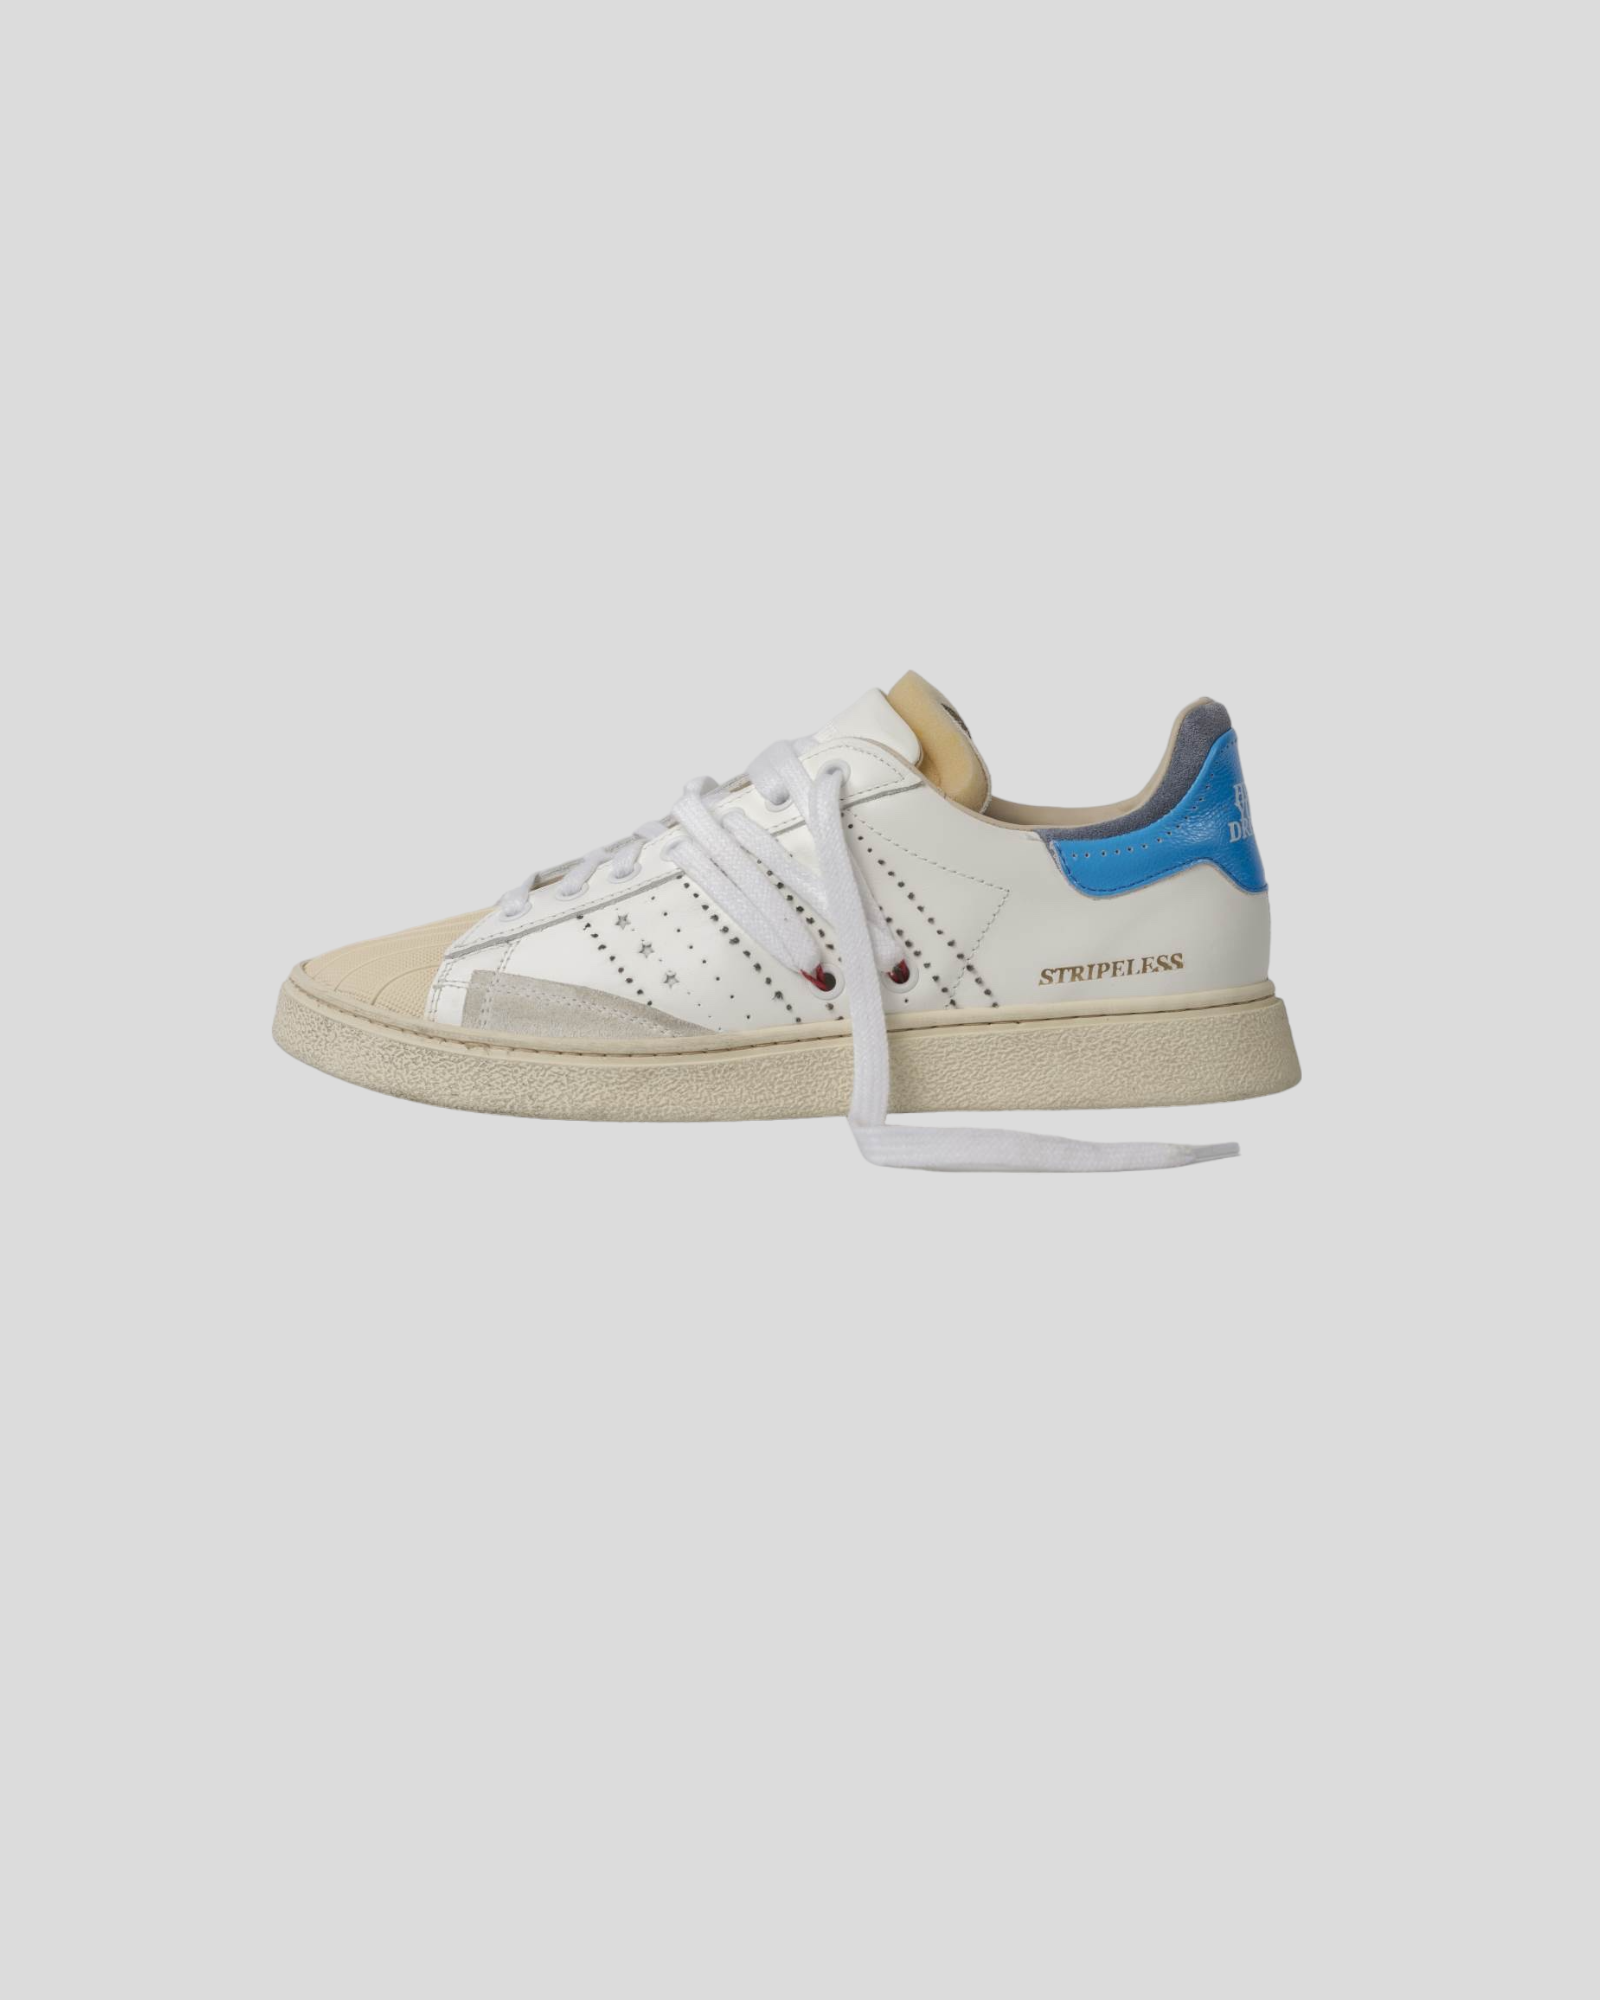 Hidnander || Stripeless Ultimate - White/ Turquoise - Homme